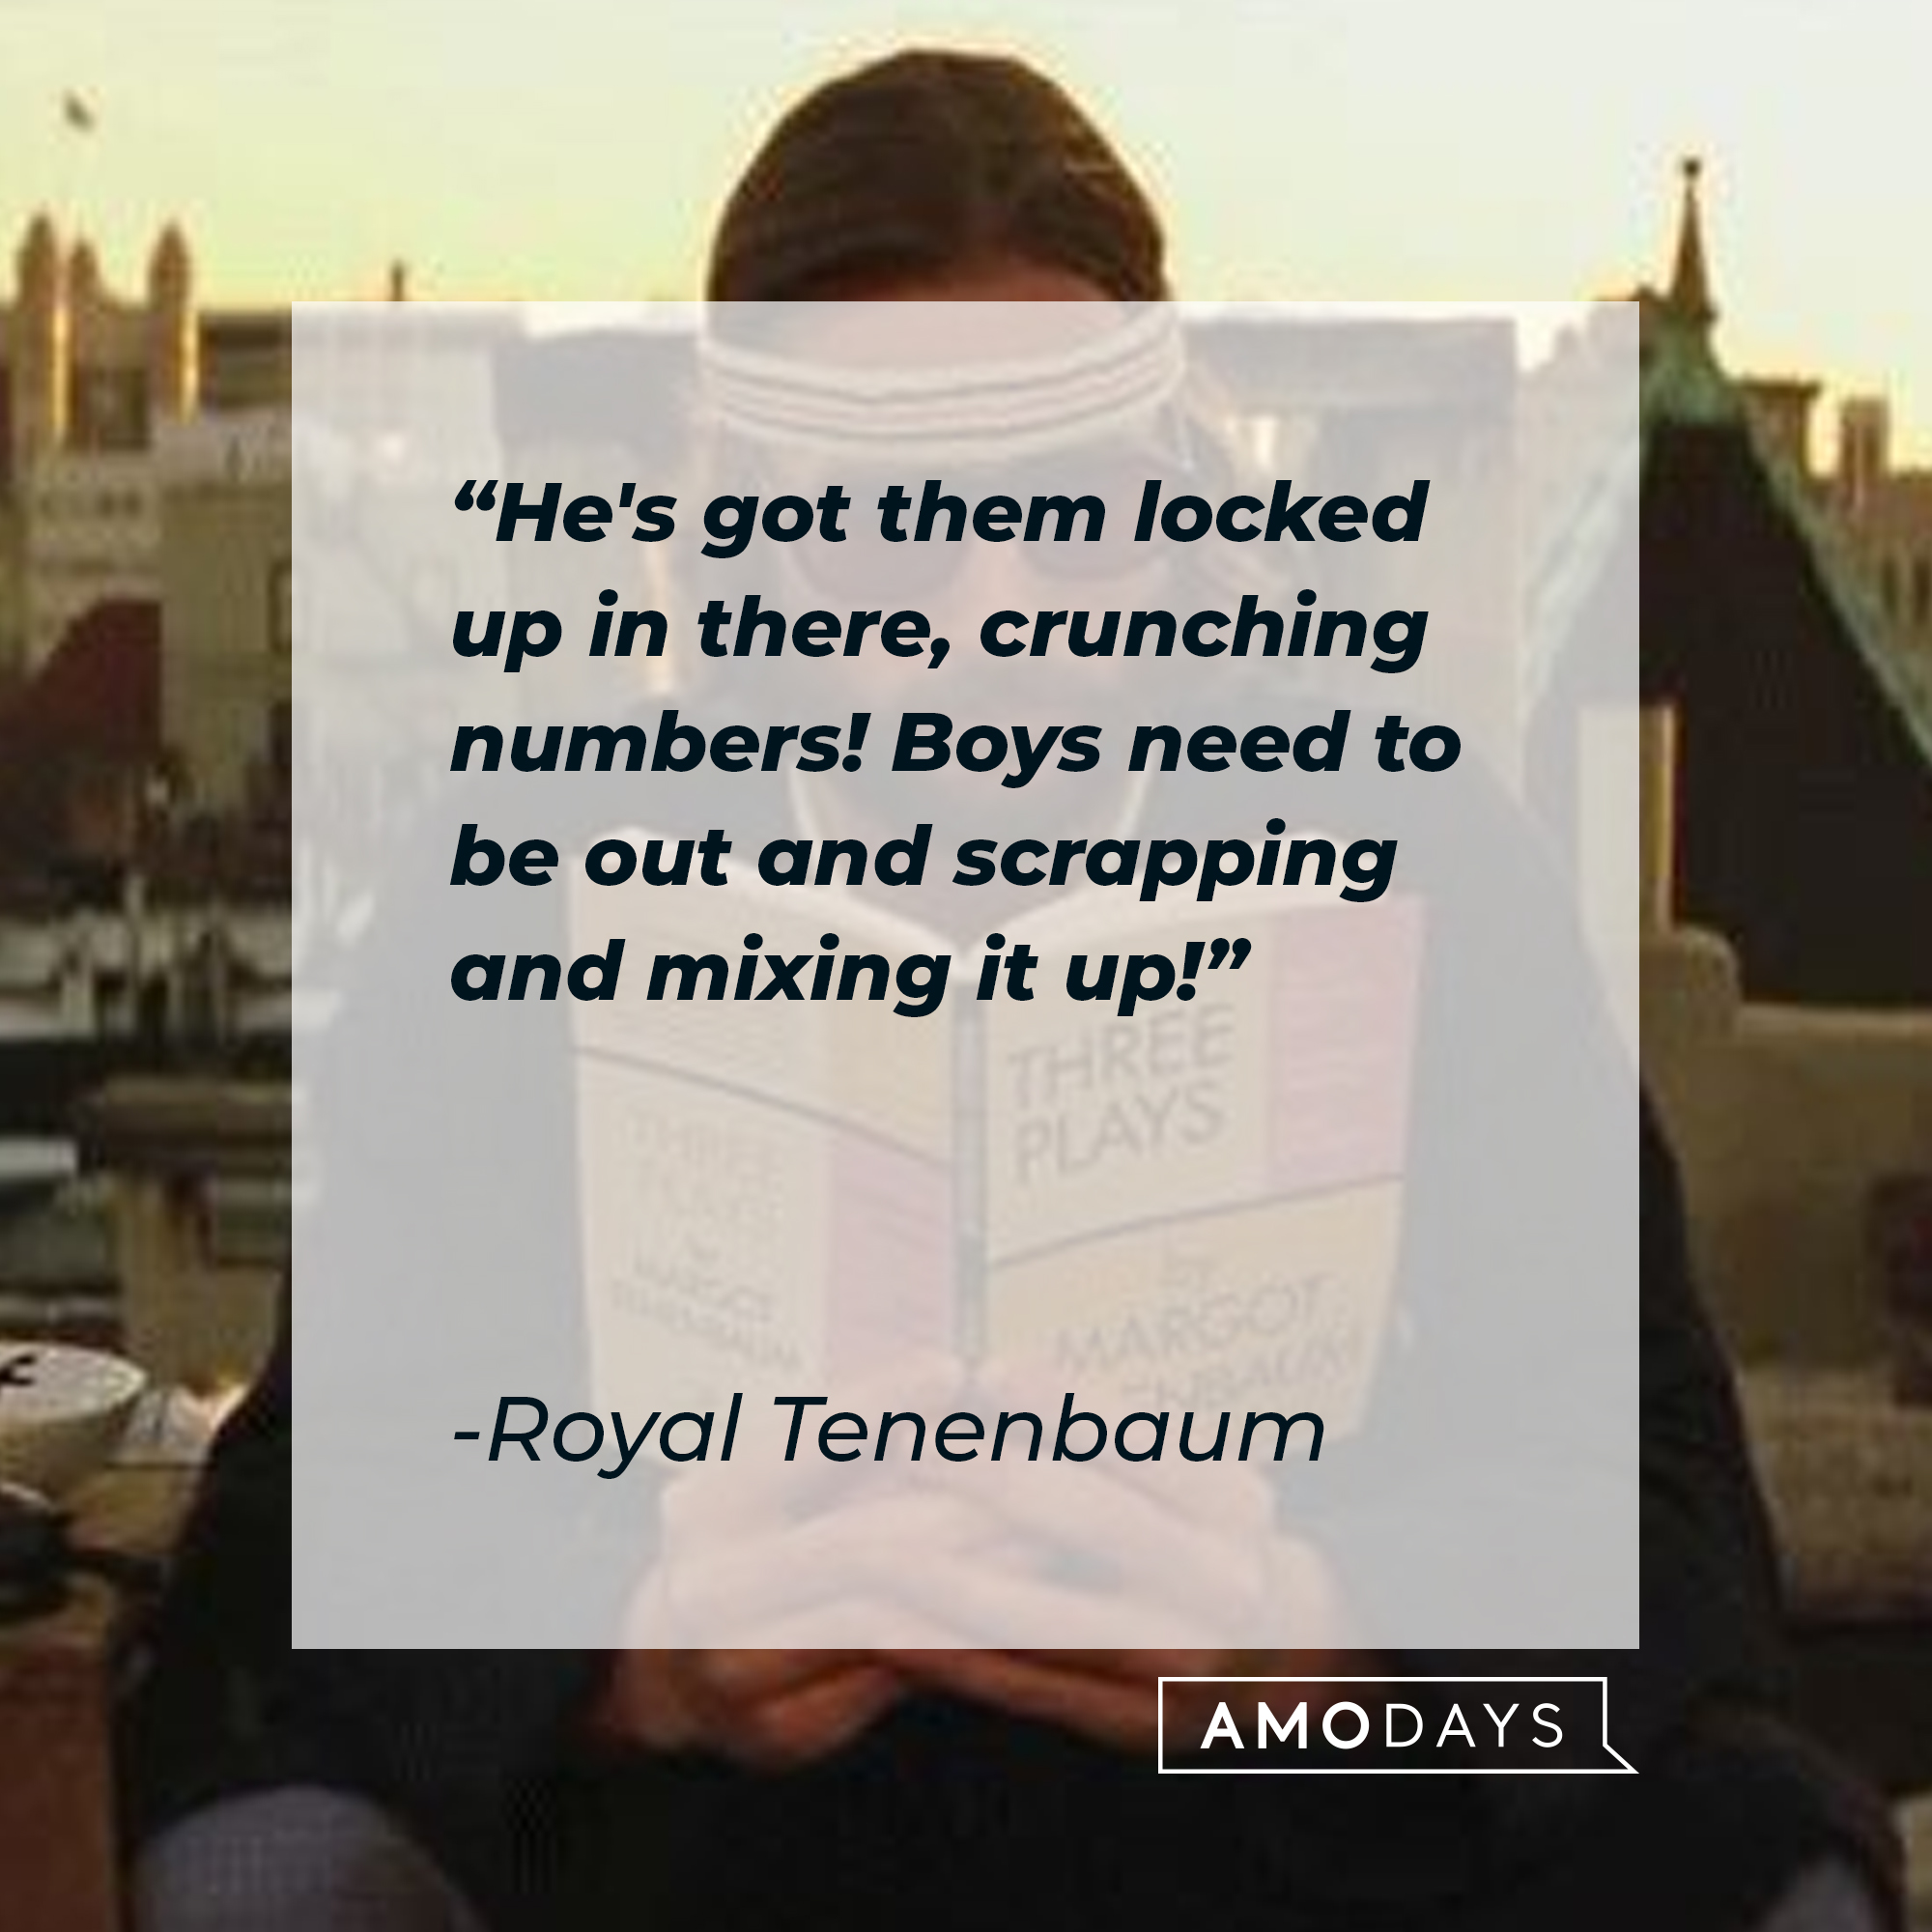 Royal Tenenbaum's quote: "He's got them locked up in there, crunching numbers! Boys need to be out and scrapping and mixing it up!" | Image: AmoDays